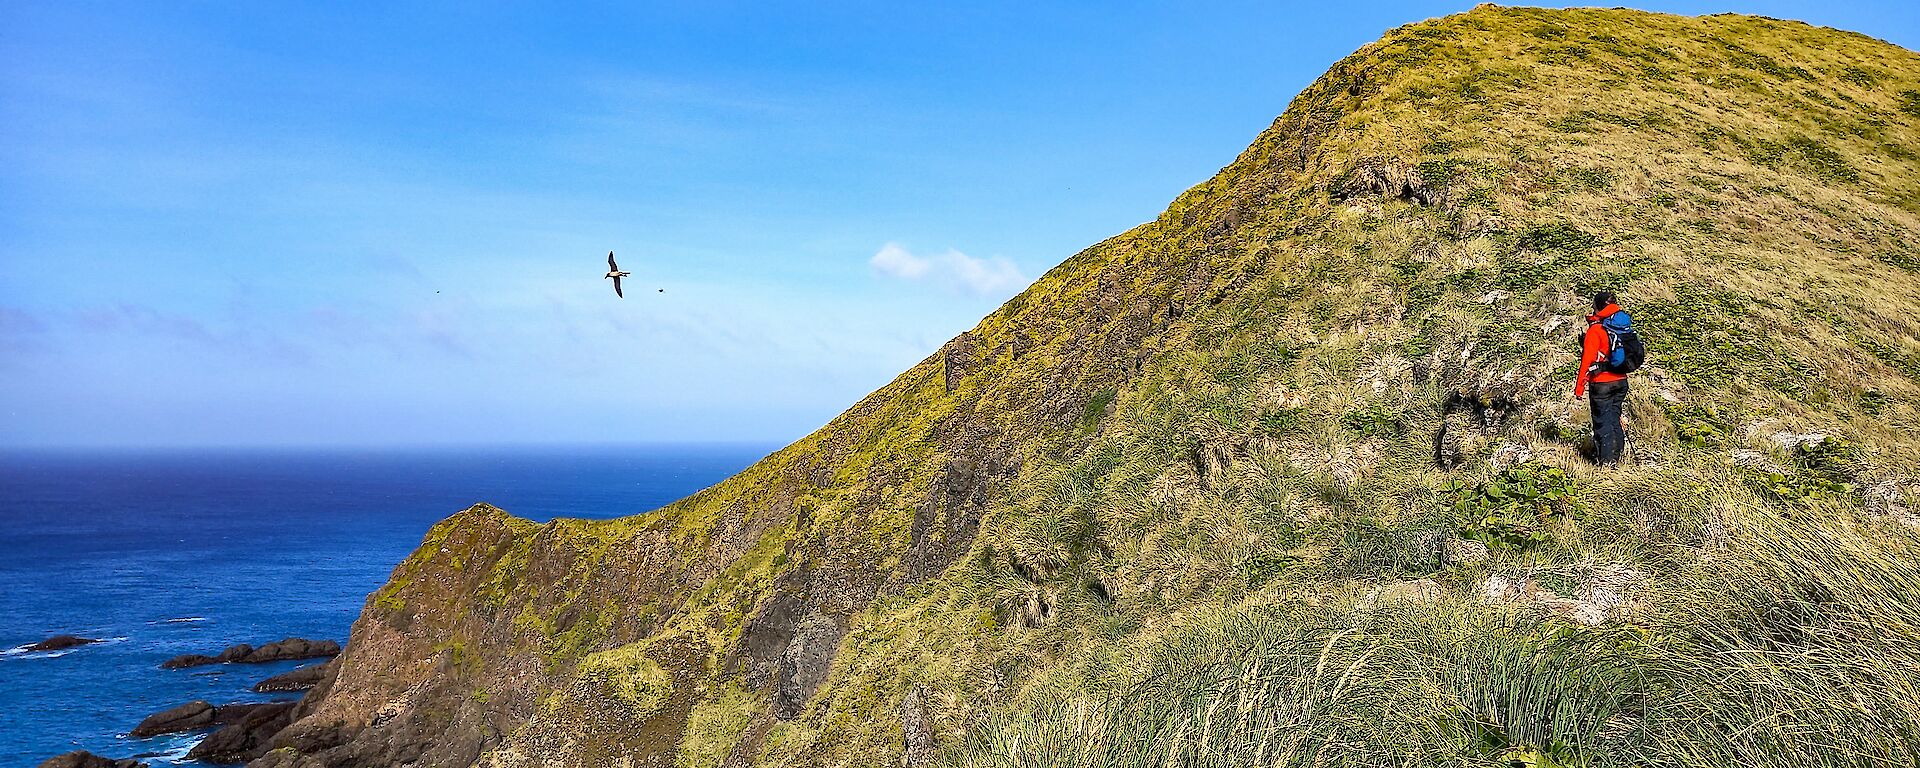 An expeditioner stands on a grassy hill surrounded by sea.  Two large birds can be seen flying just of the shore.